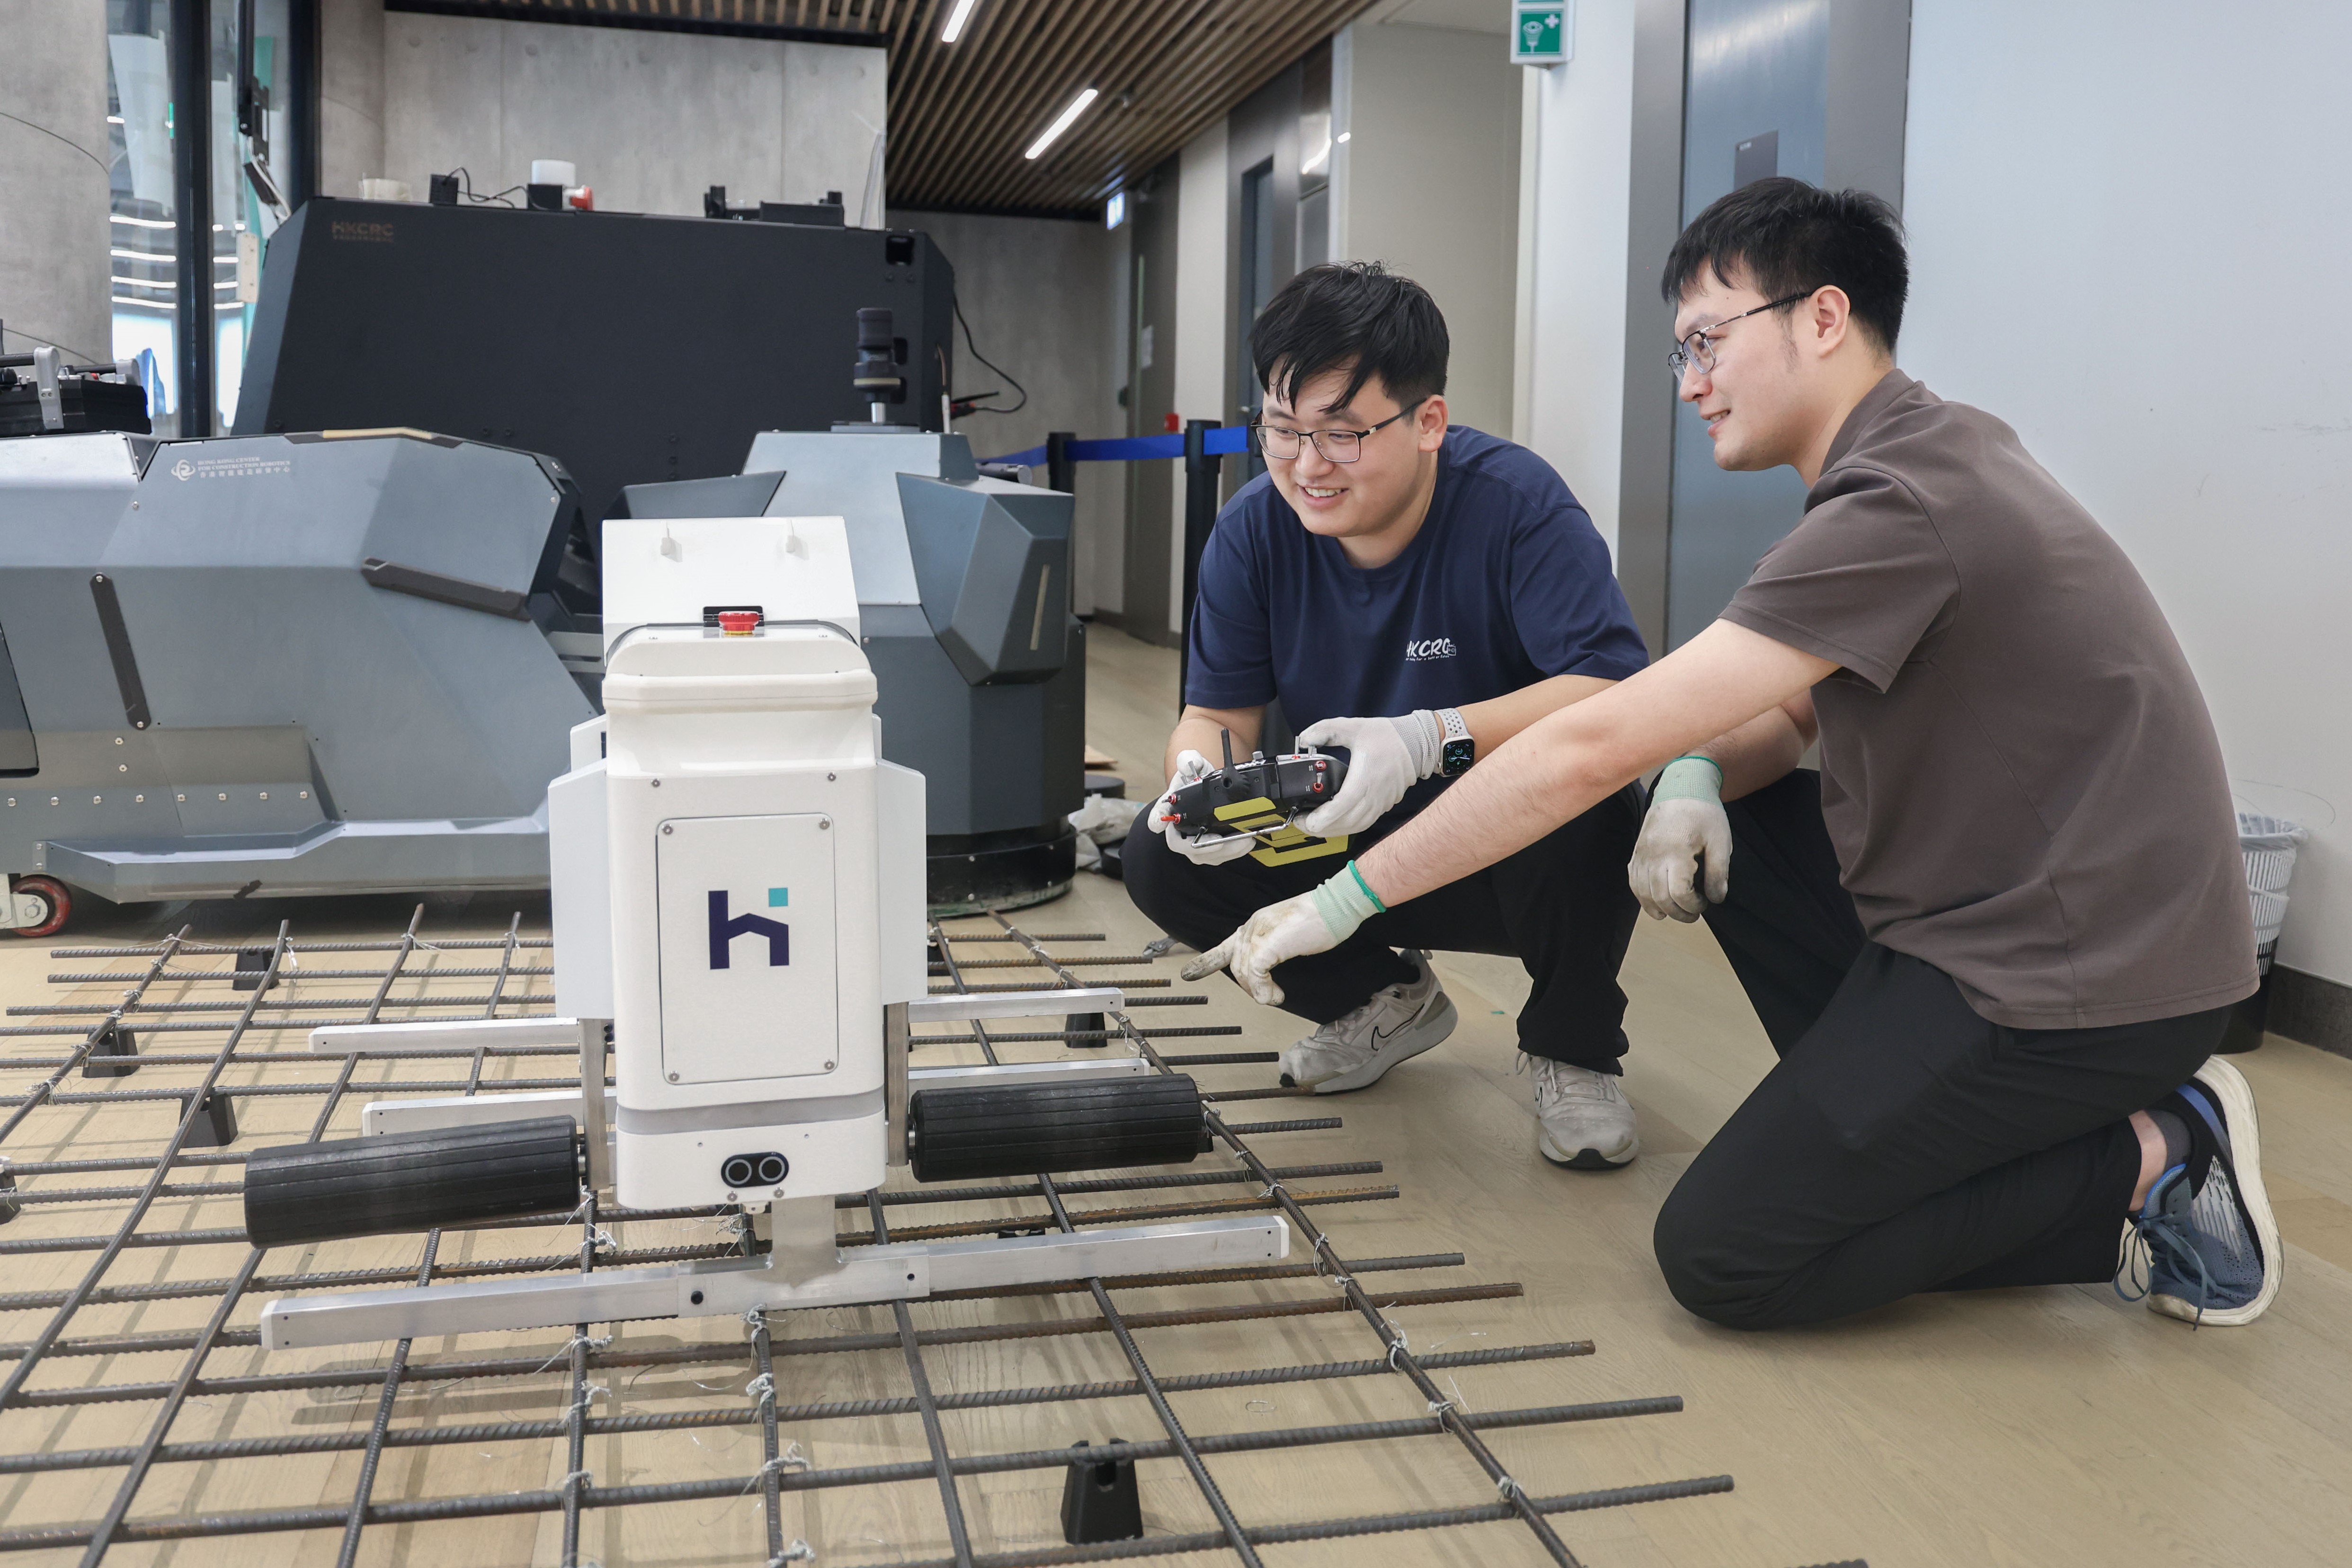 The rebar tying robot, a research project led by HKUST MPhil student LI Haozhen (left), was awarded a Gold Medal with Congratulations of the Jury at the 49th International Exhibition of Inventions Geneva.